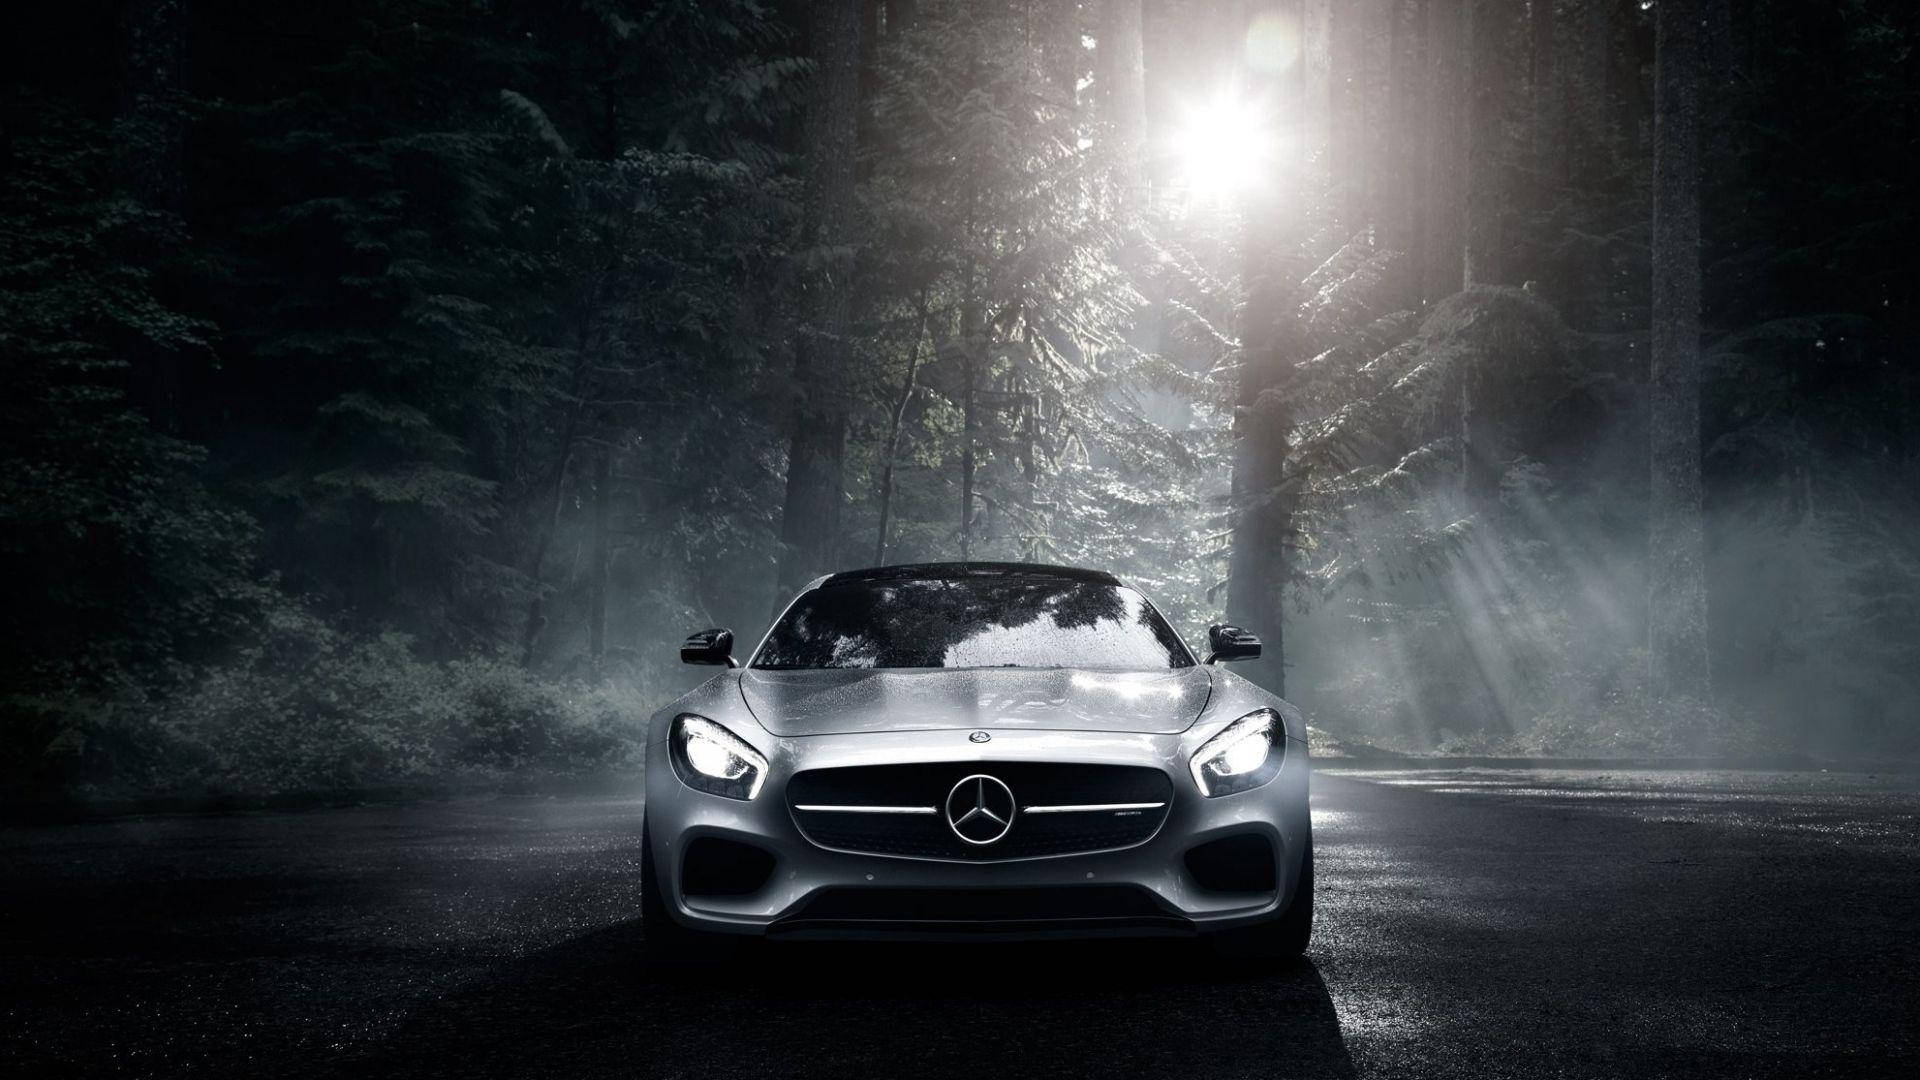 1920x1080 Full Hd Car In Forest At Night Wallpaper